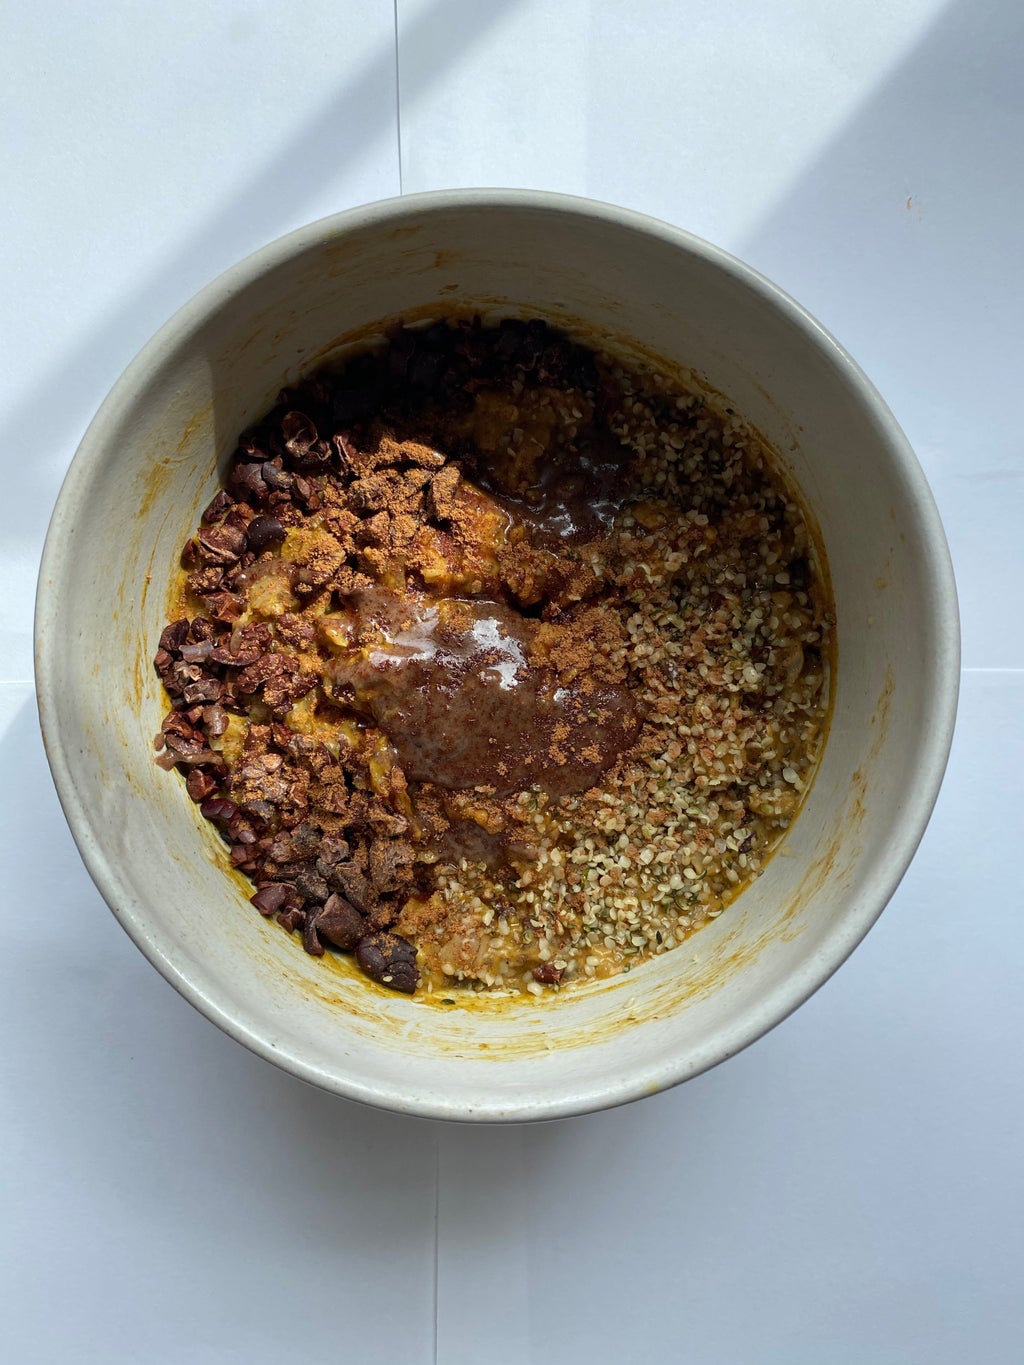 dorm oatmeal with spices, nut butter, and chocolate pieces